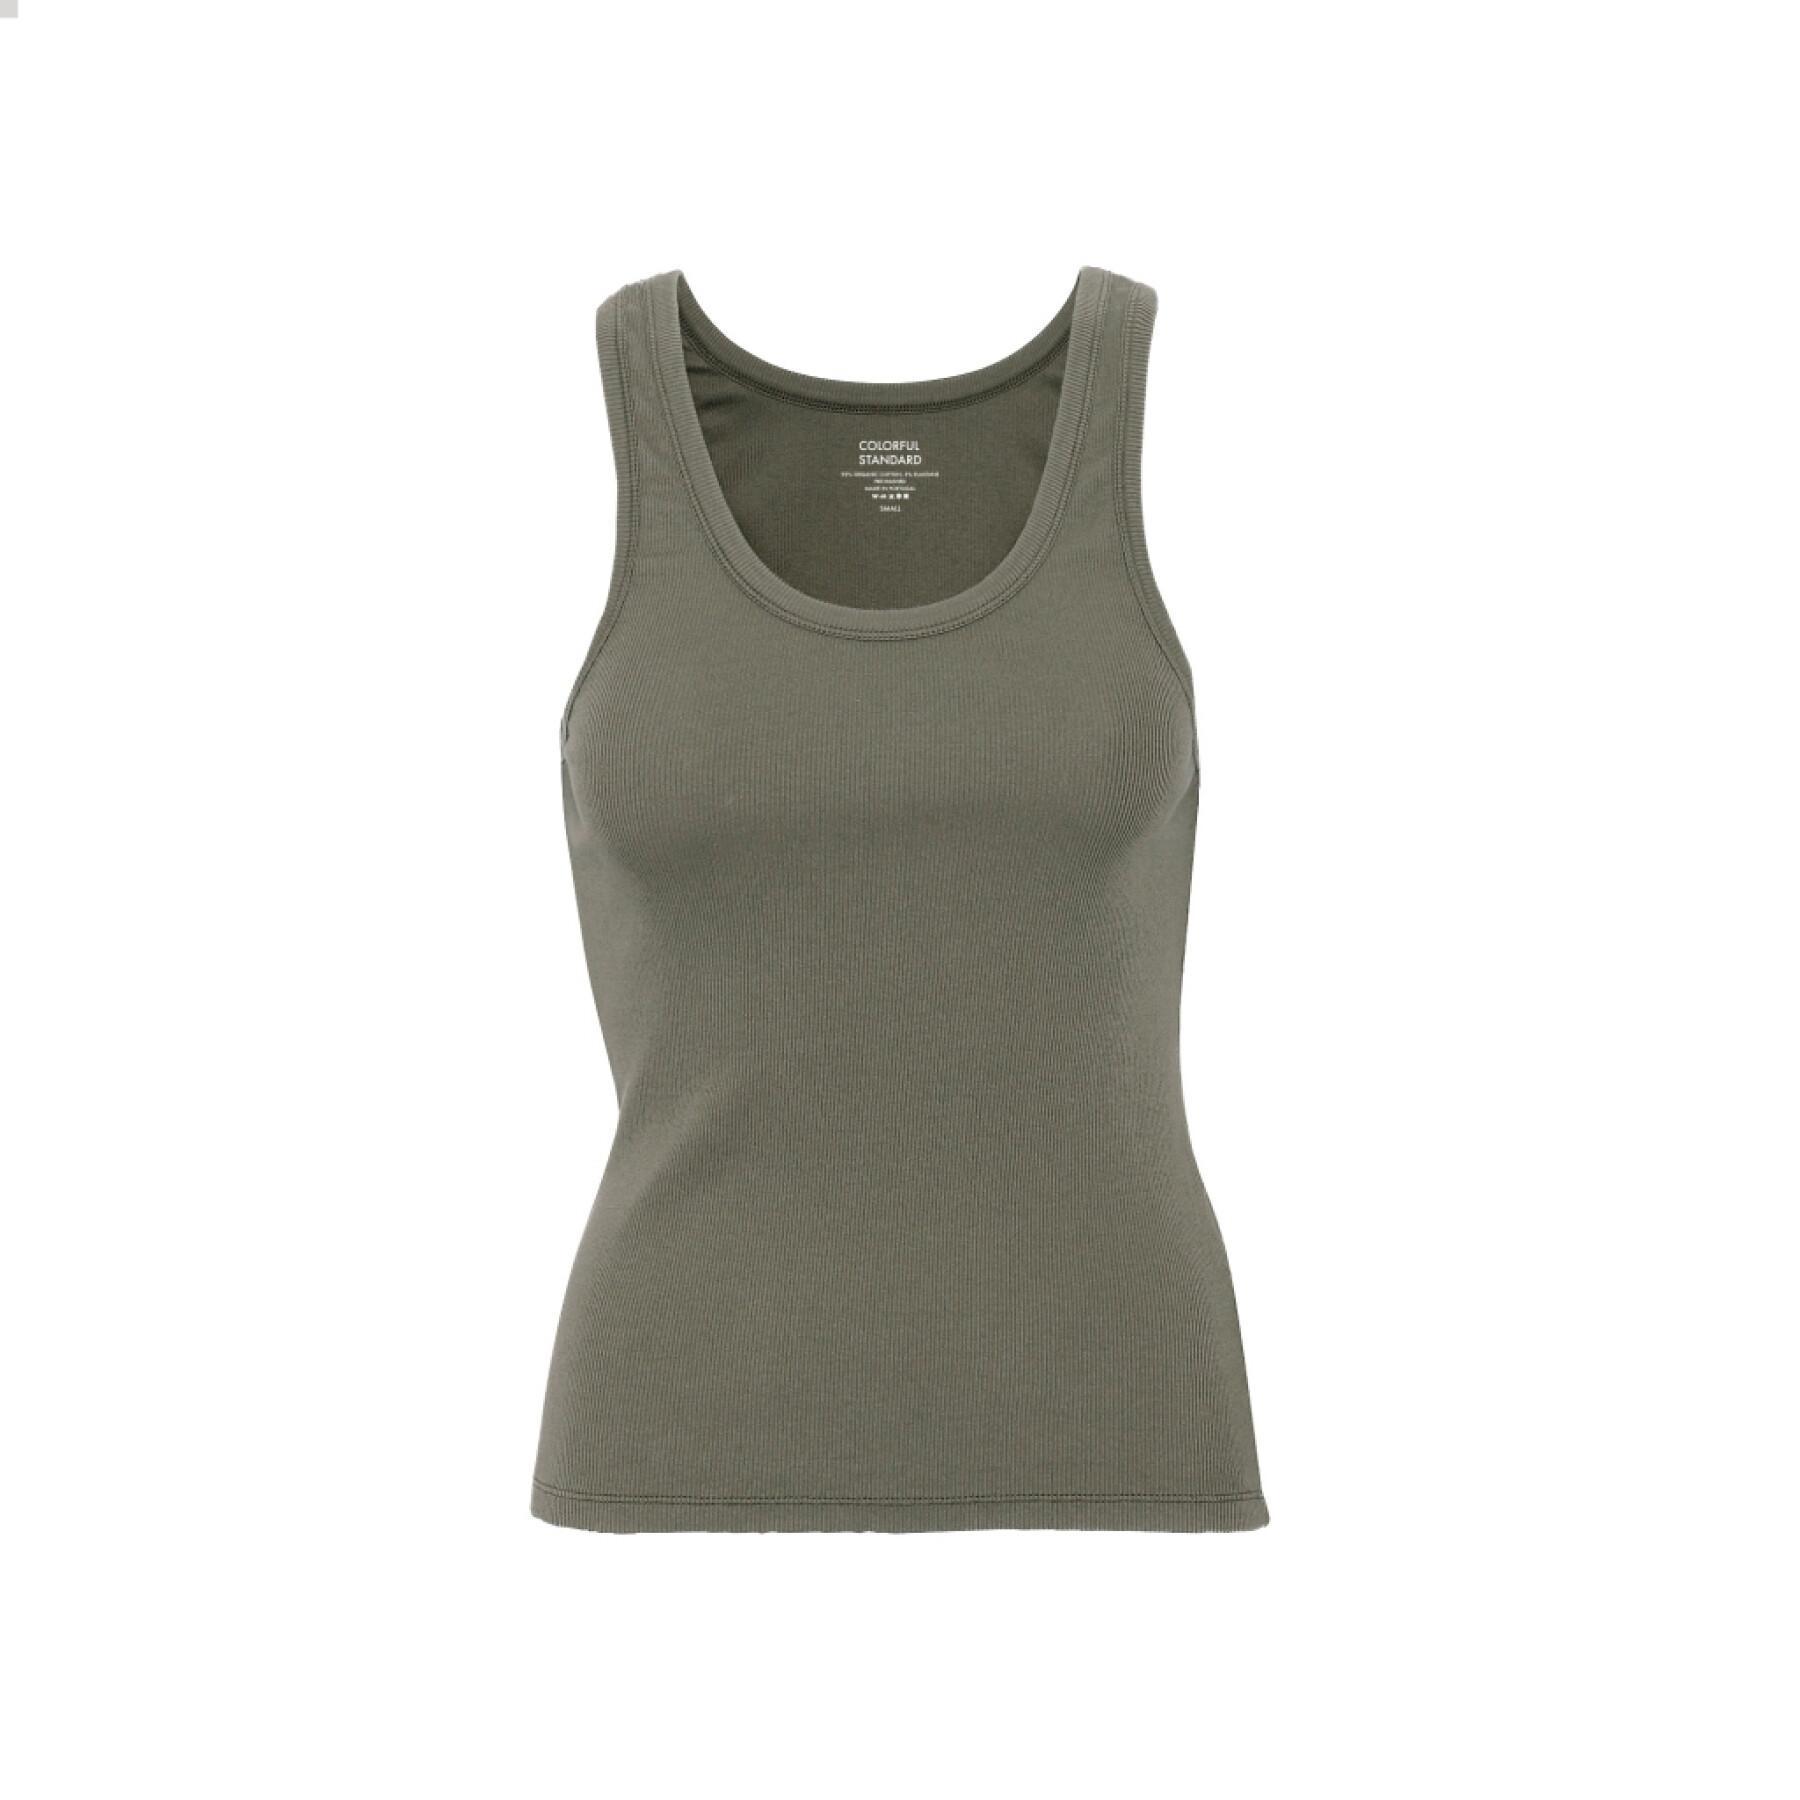 Women's ribbed tank top Colorful Standard Organic dusty olive